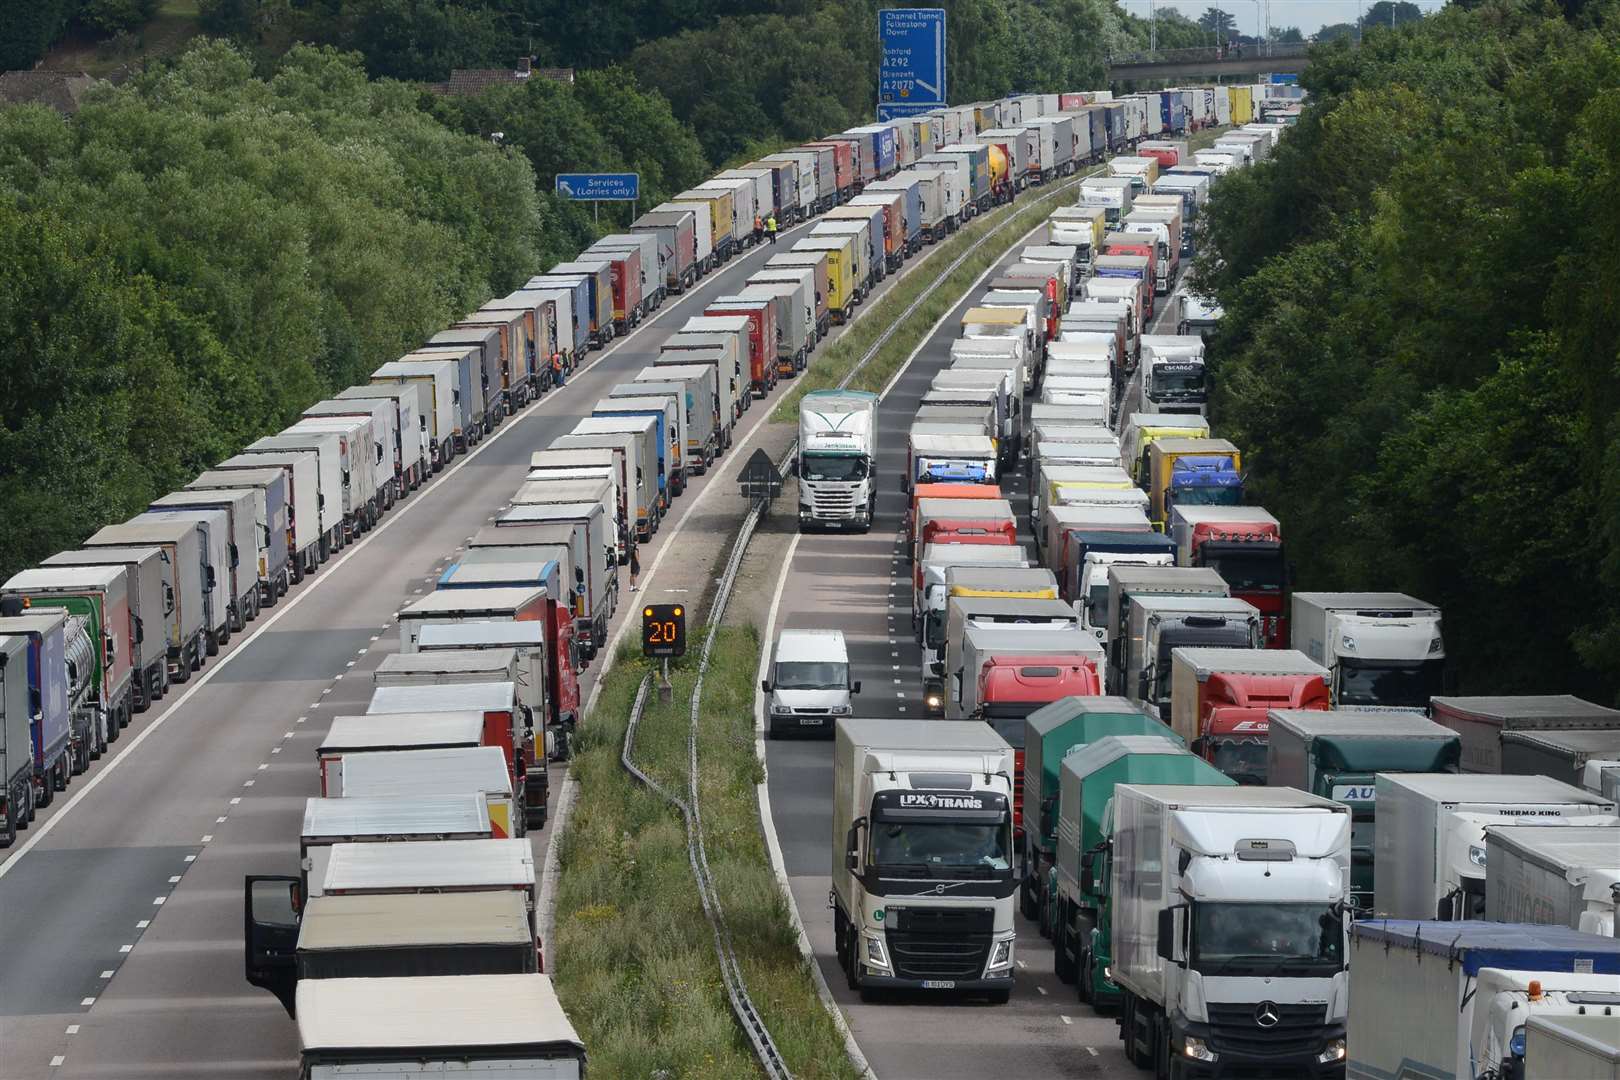 Visit Kent has voiced concerns over Operation Brock - replacement scheme to Operation Stack